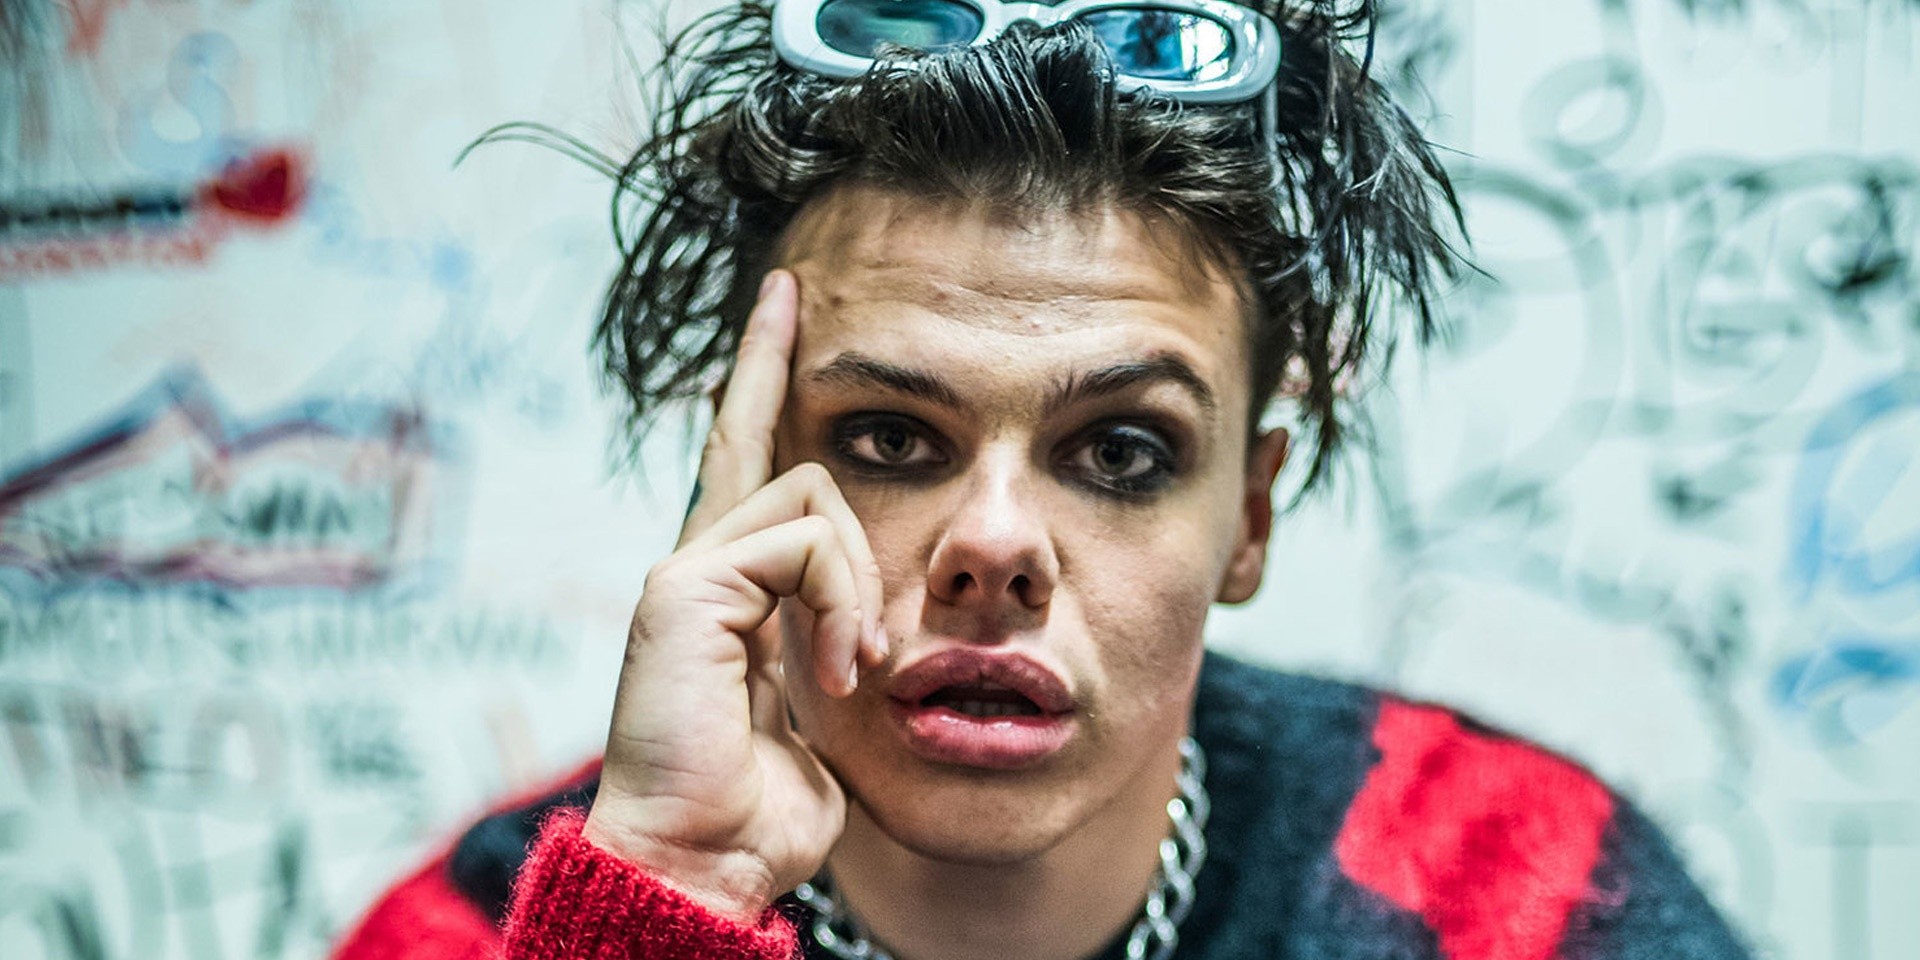 YUNGBLUD to play one-night concert in Manila this March